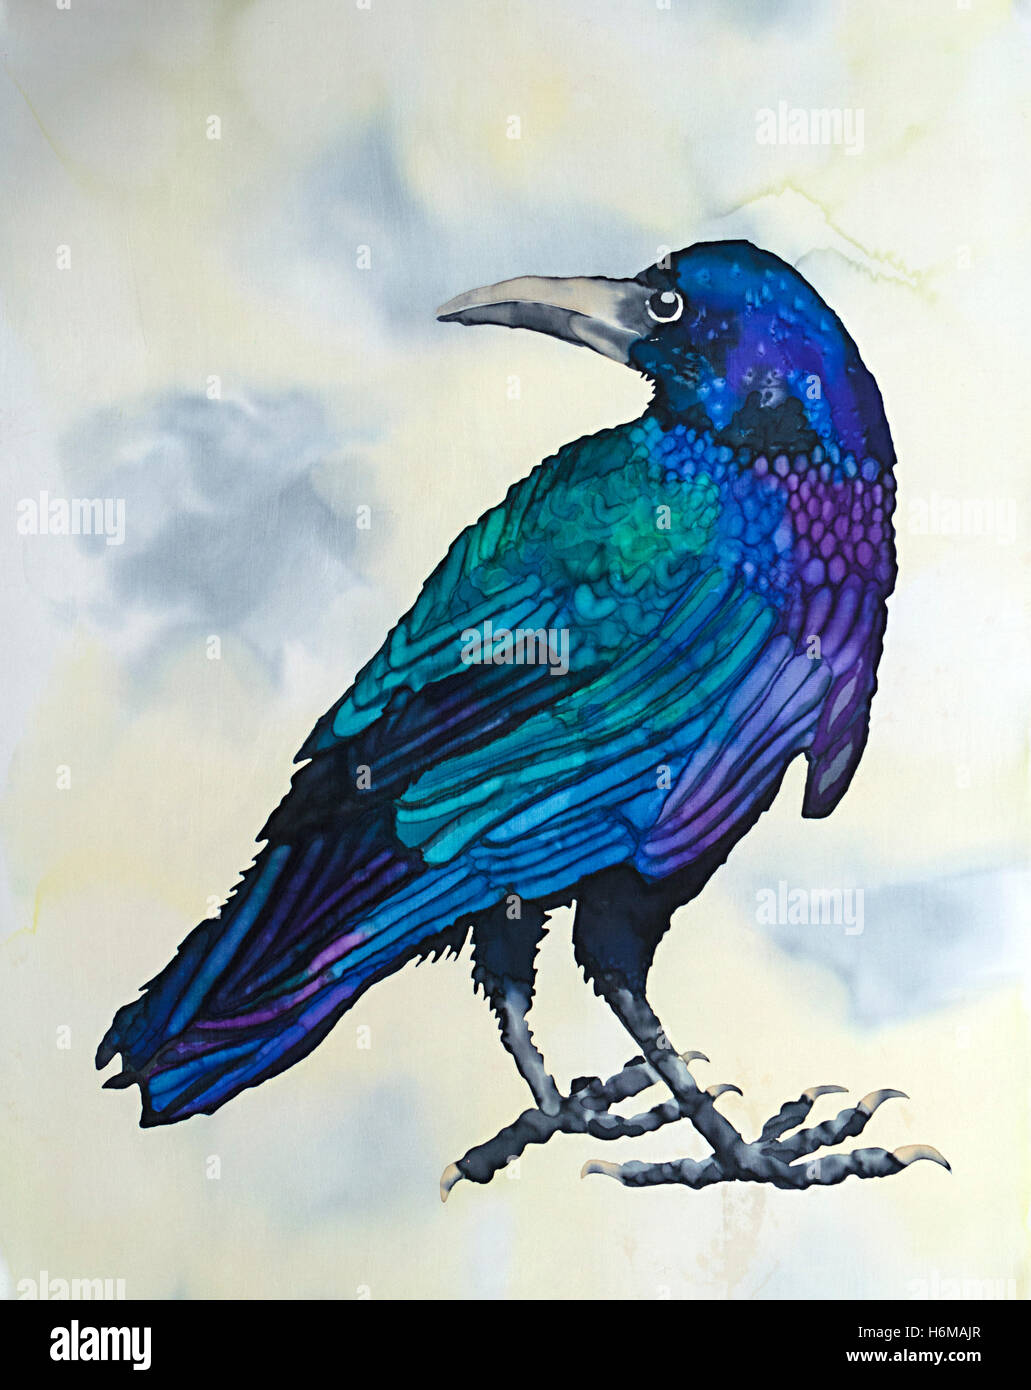 Photograph of silk painting of a rook bird against graded background using steam fixed dyes by Paula Chapman. Stock Photo